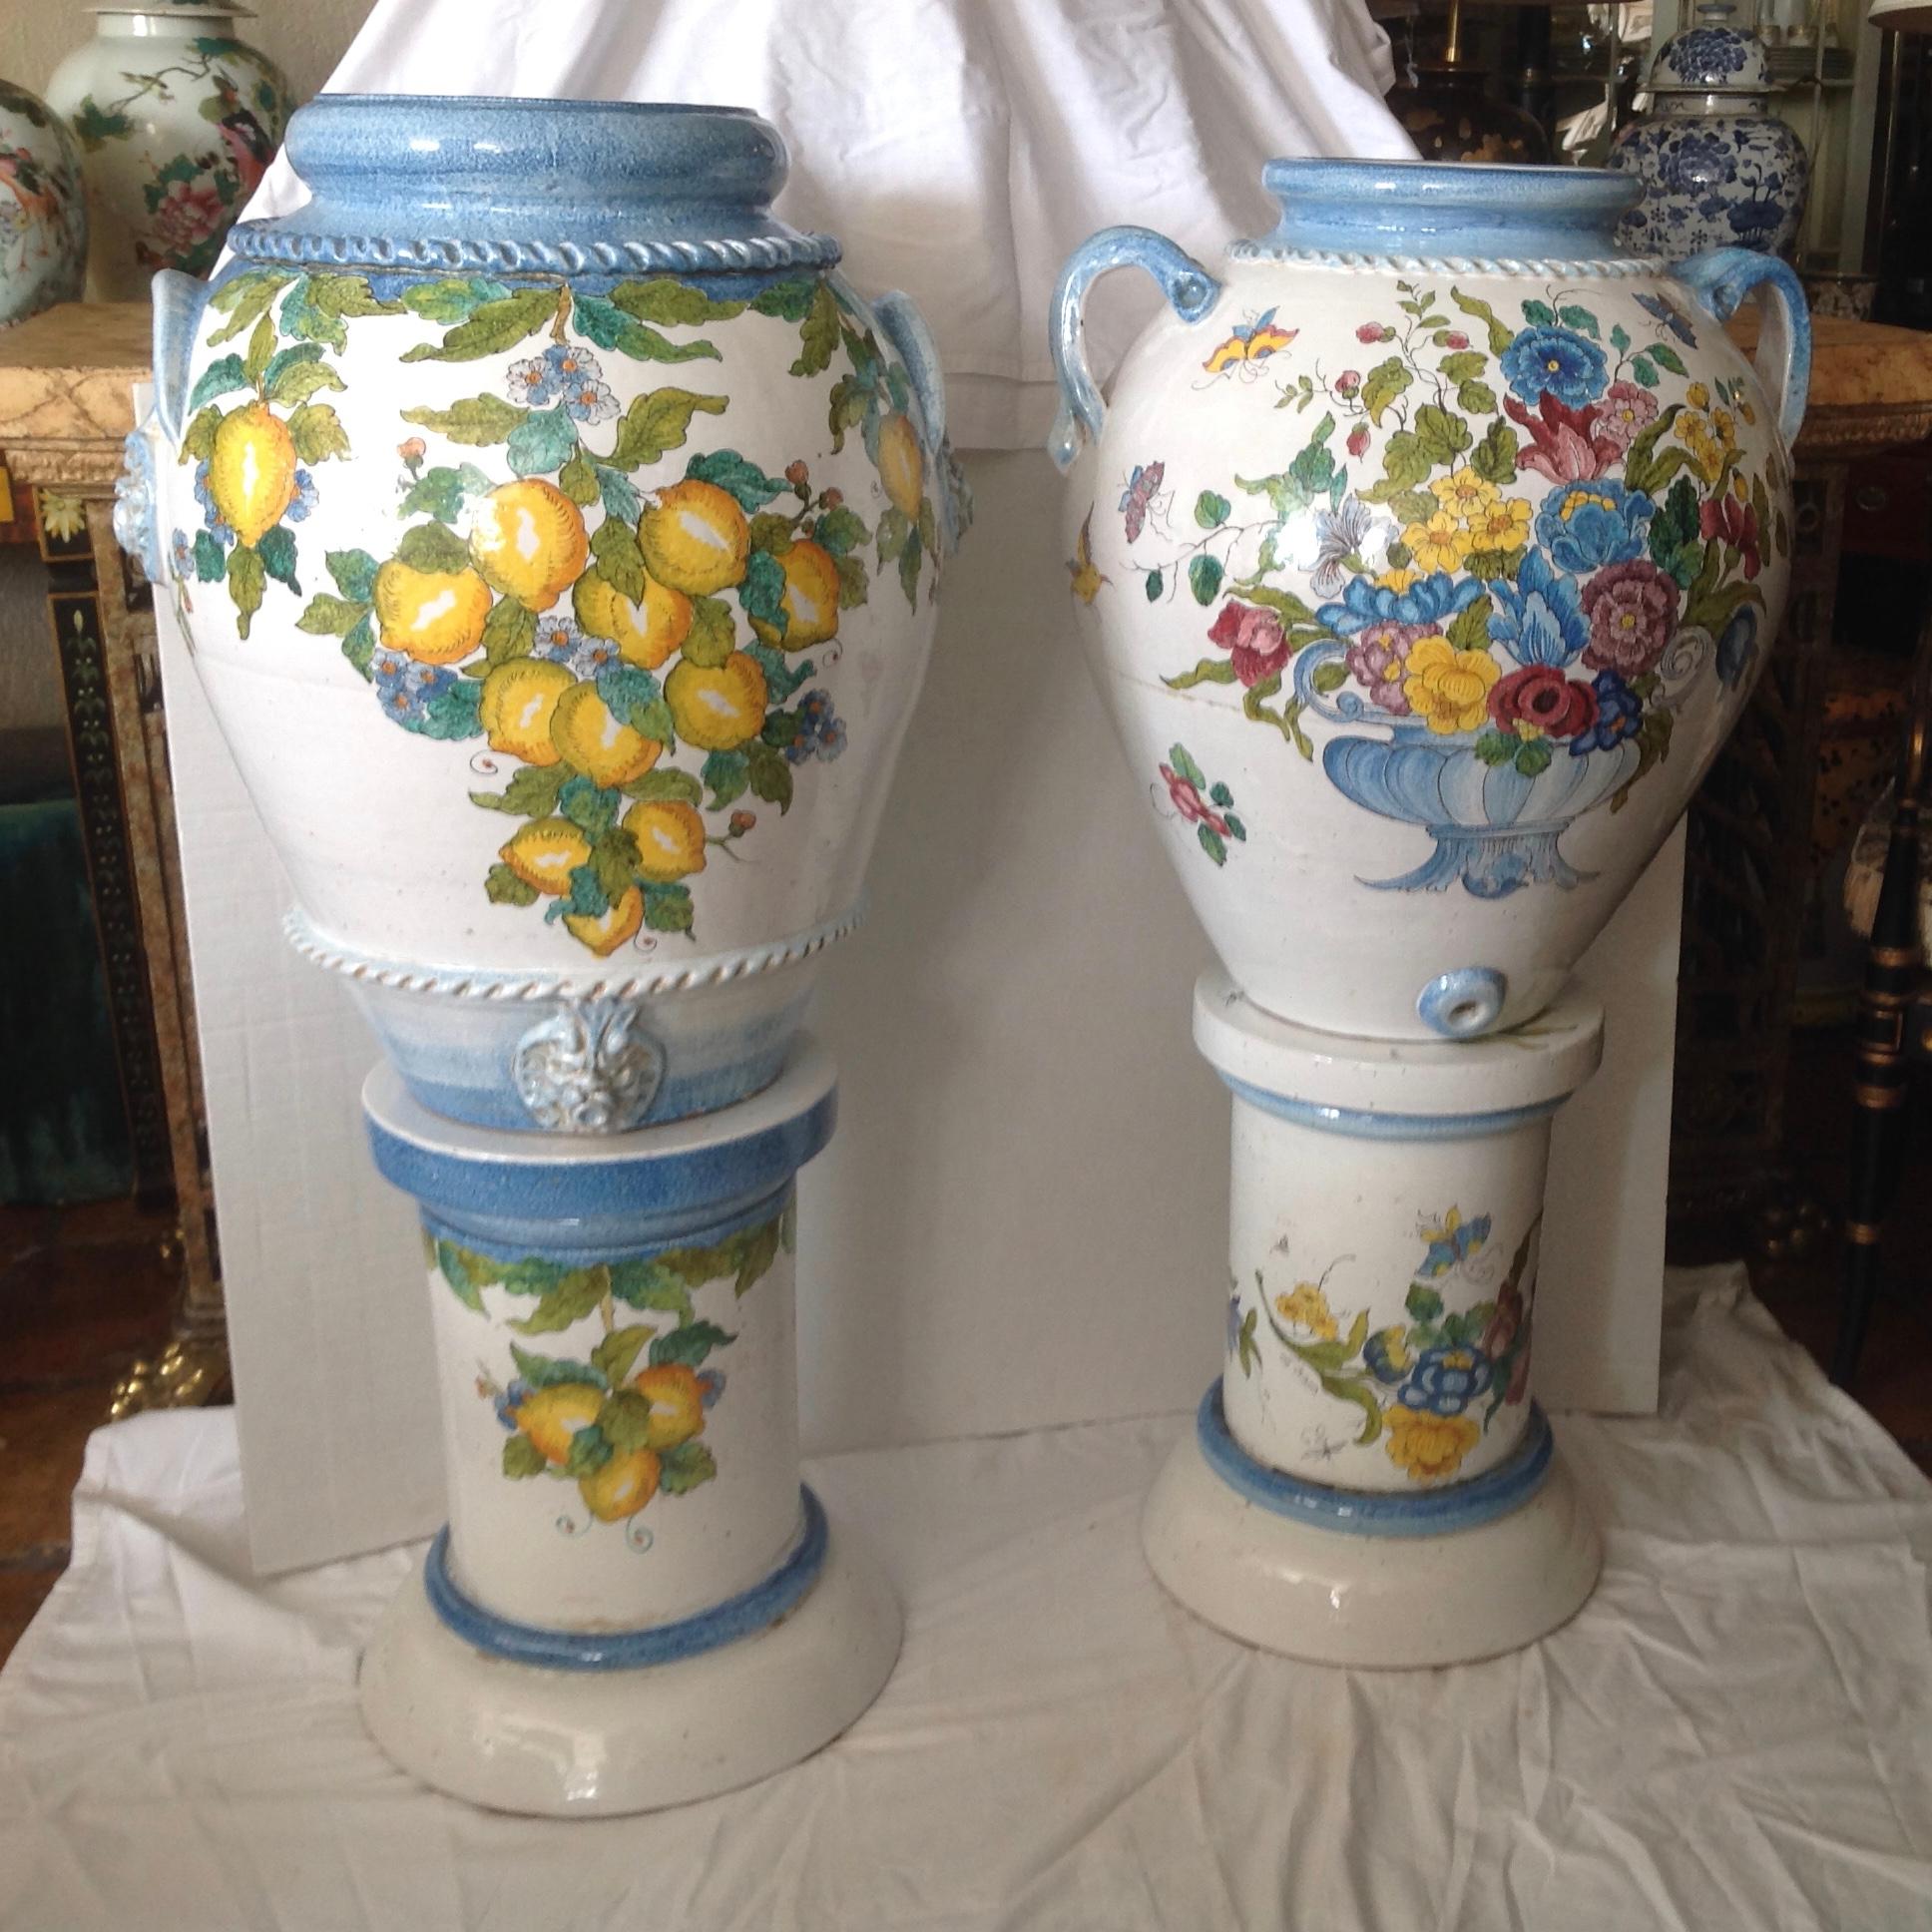 Dramatic in scale: Hand painted urns - superbly fashioned in the Tuscan style - 
signed La Chimera. The pair with urn form and details - perfectly complementary.